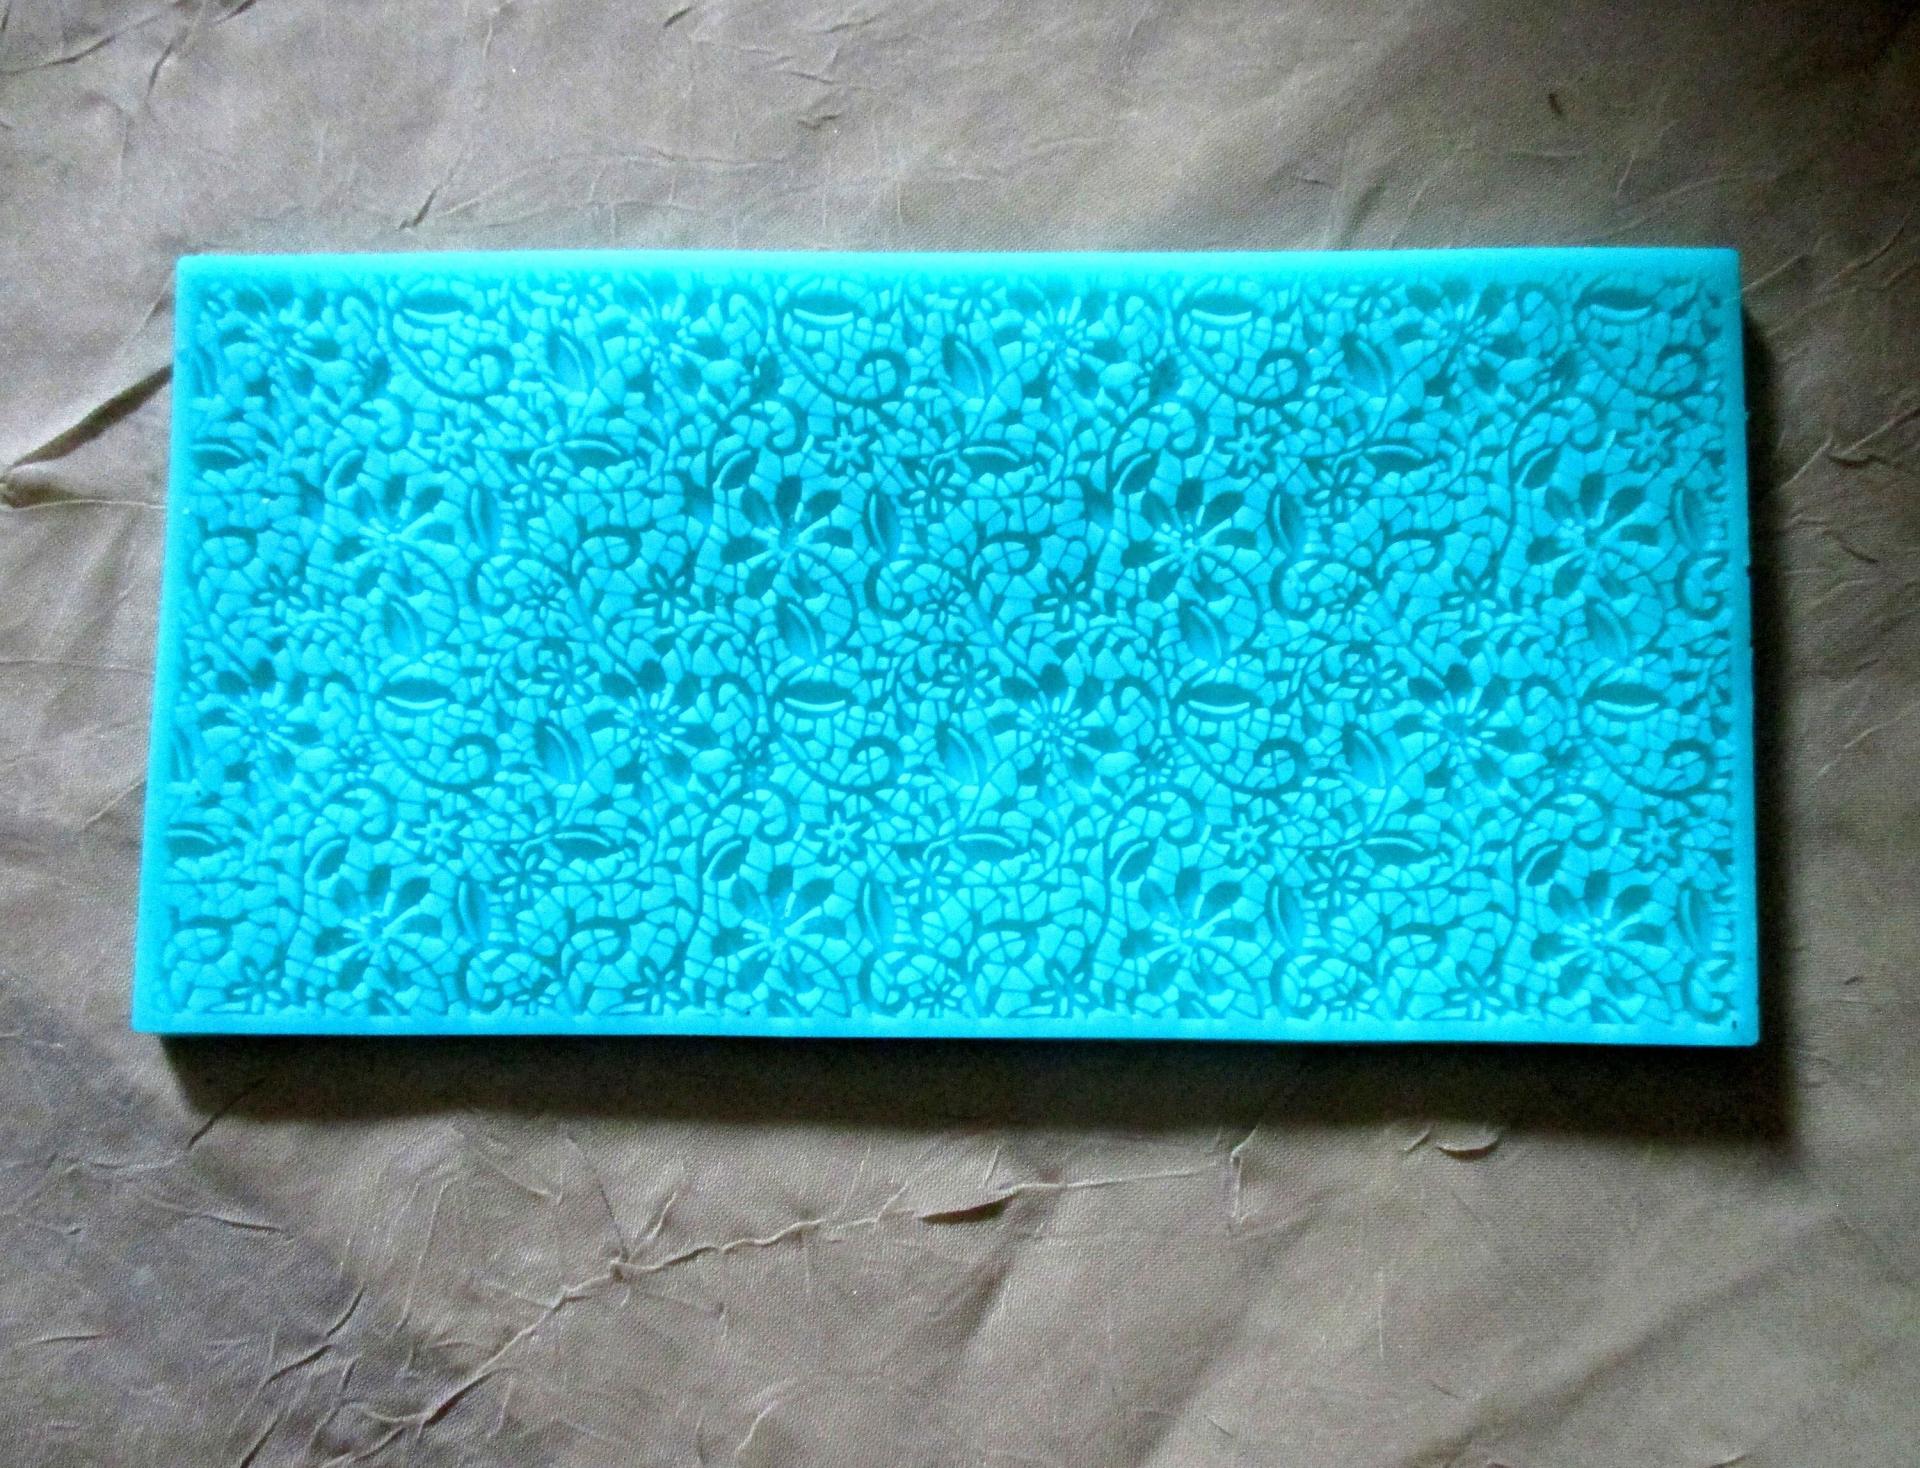 Silicone Floral Lace Mat Mold - Texture Stamp, Embossing Stamp - for use with Clay, Casting, for Soap, or Baking